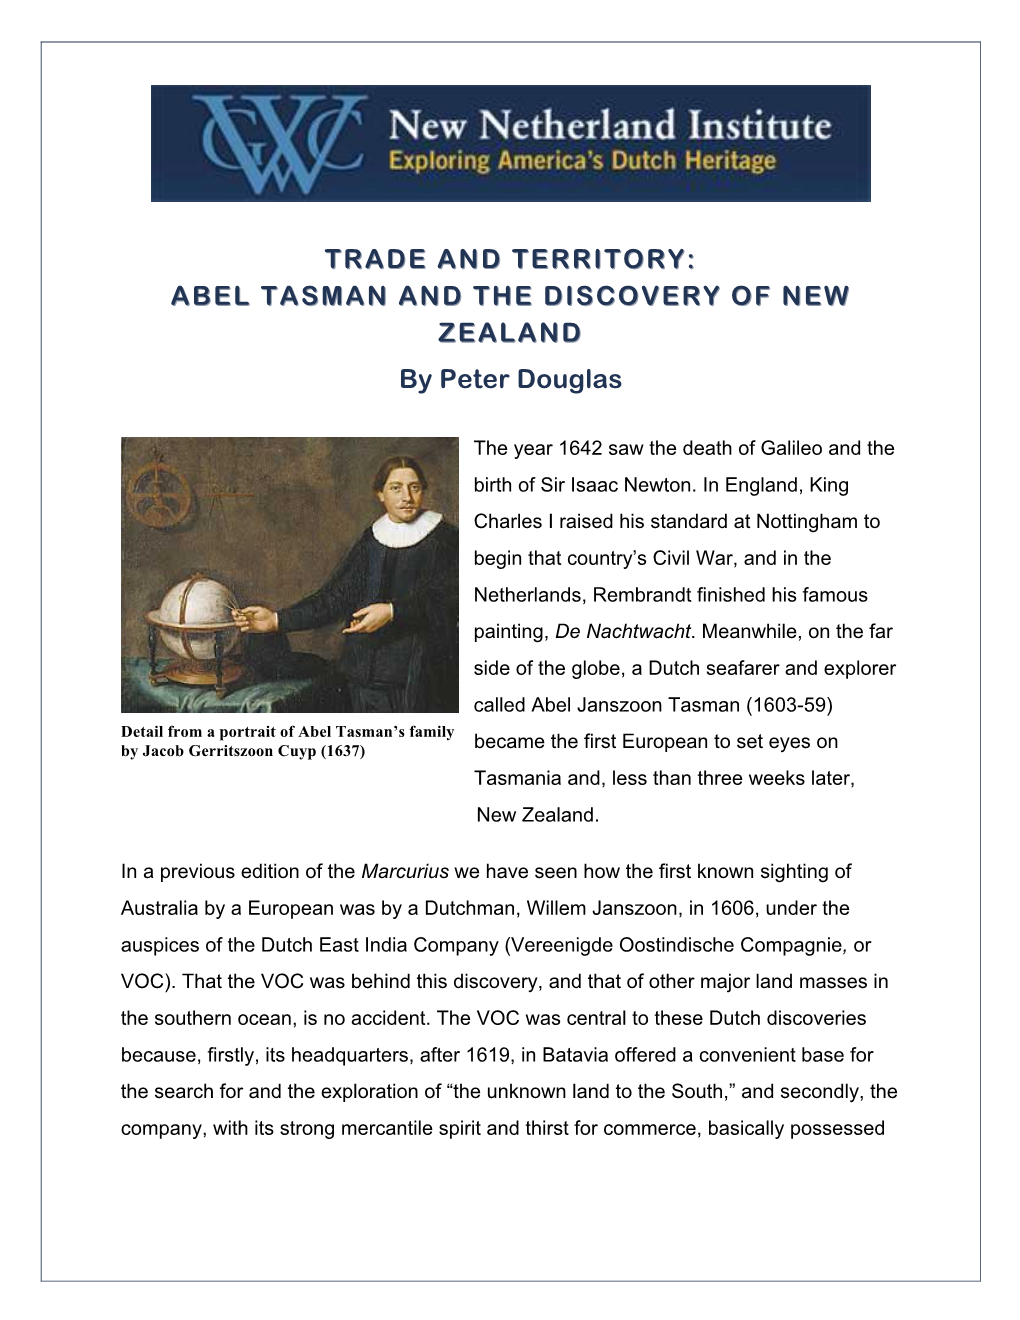 ABEL TASMAN and the DISCOVERY of NEW ZEALAND by Peter Douglas